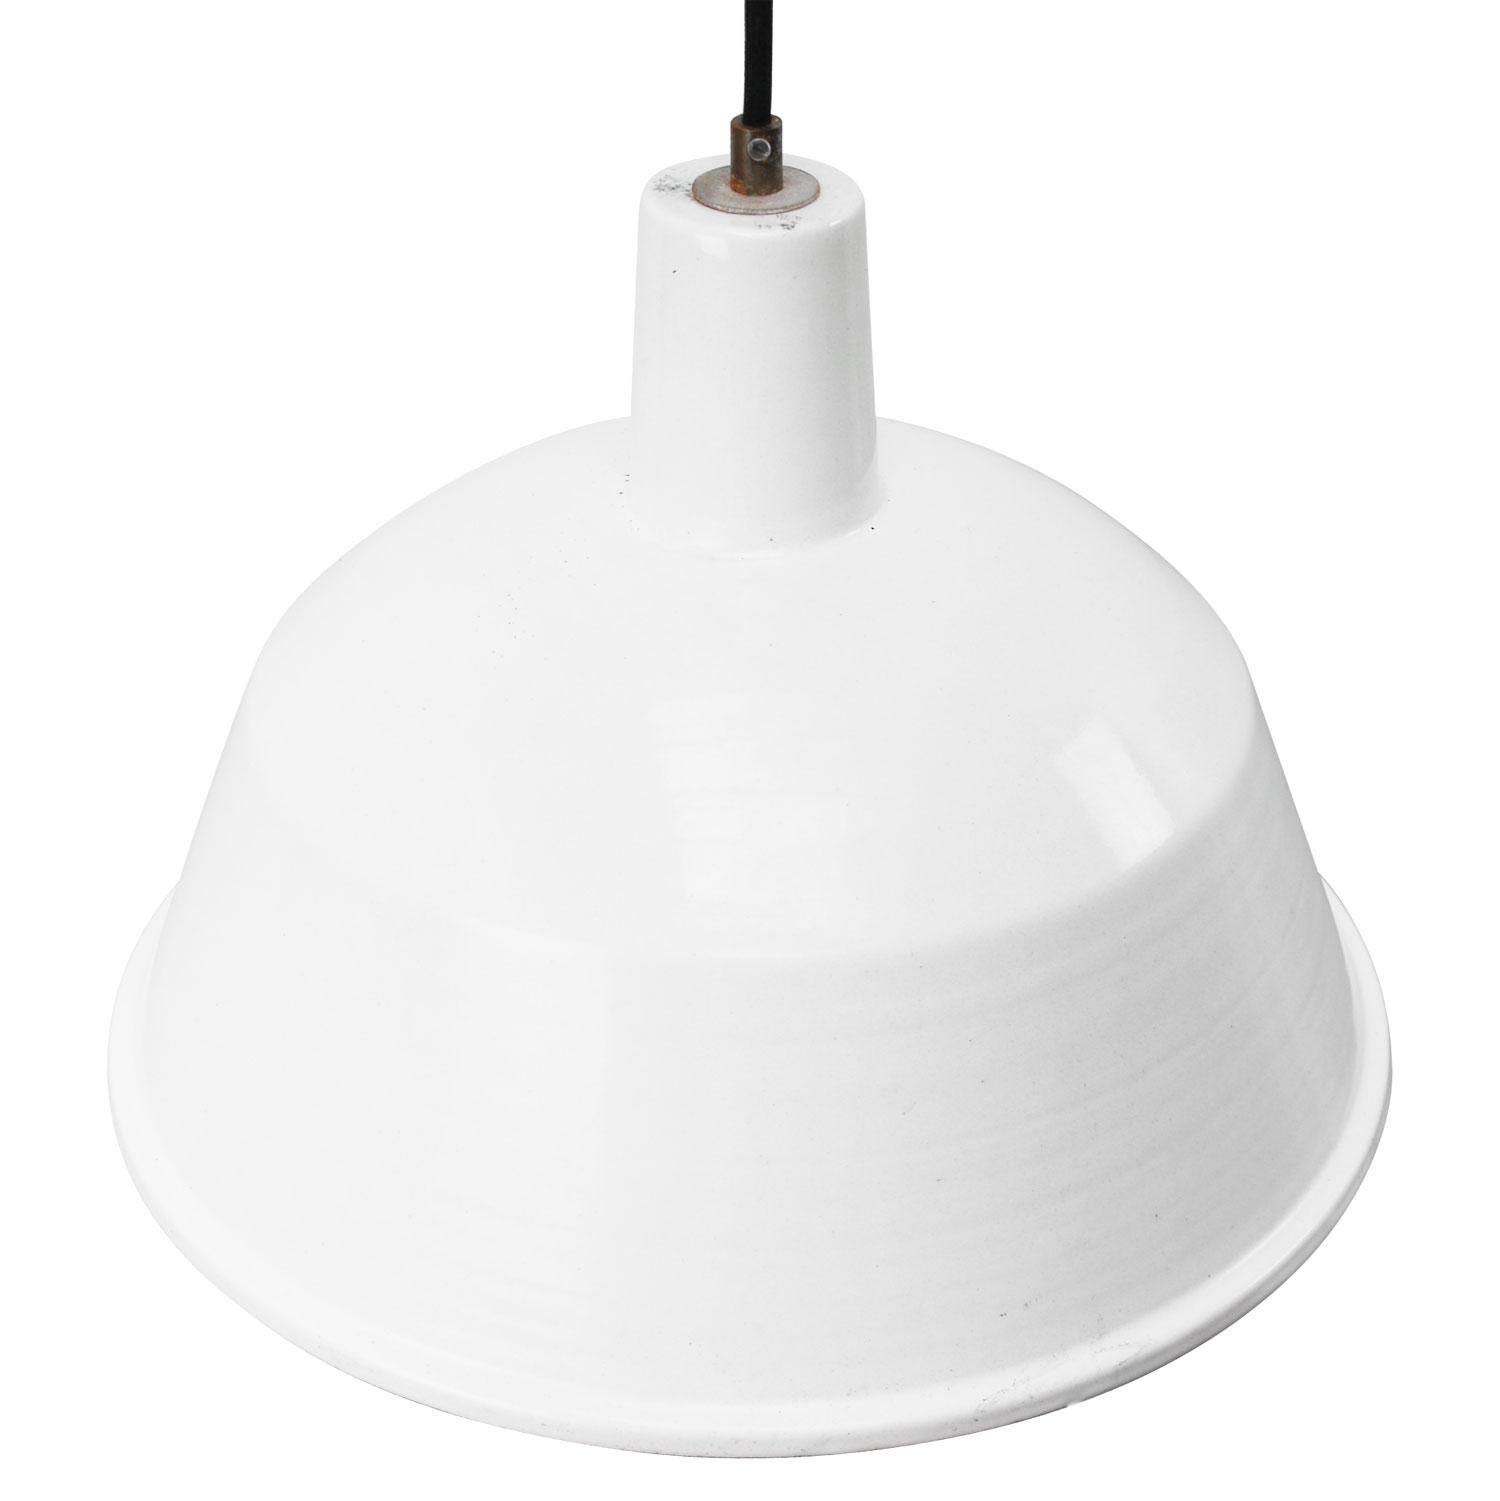 White industrial pendant.
Vintage, high quality. New old stock.

Weight: 1.2 kg or 2.6 lb.

Priced per individual item. All lamps have been made suitable by international standards for incandescent light bulbs, energy-efficient and LED bulbs.